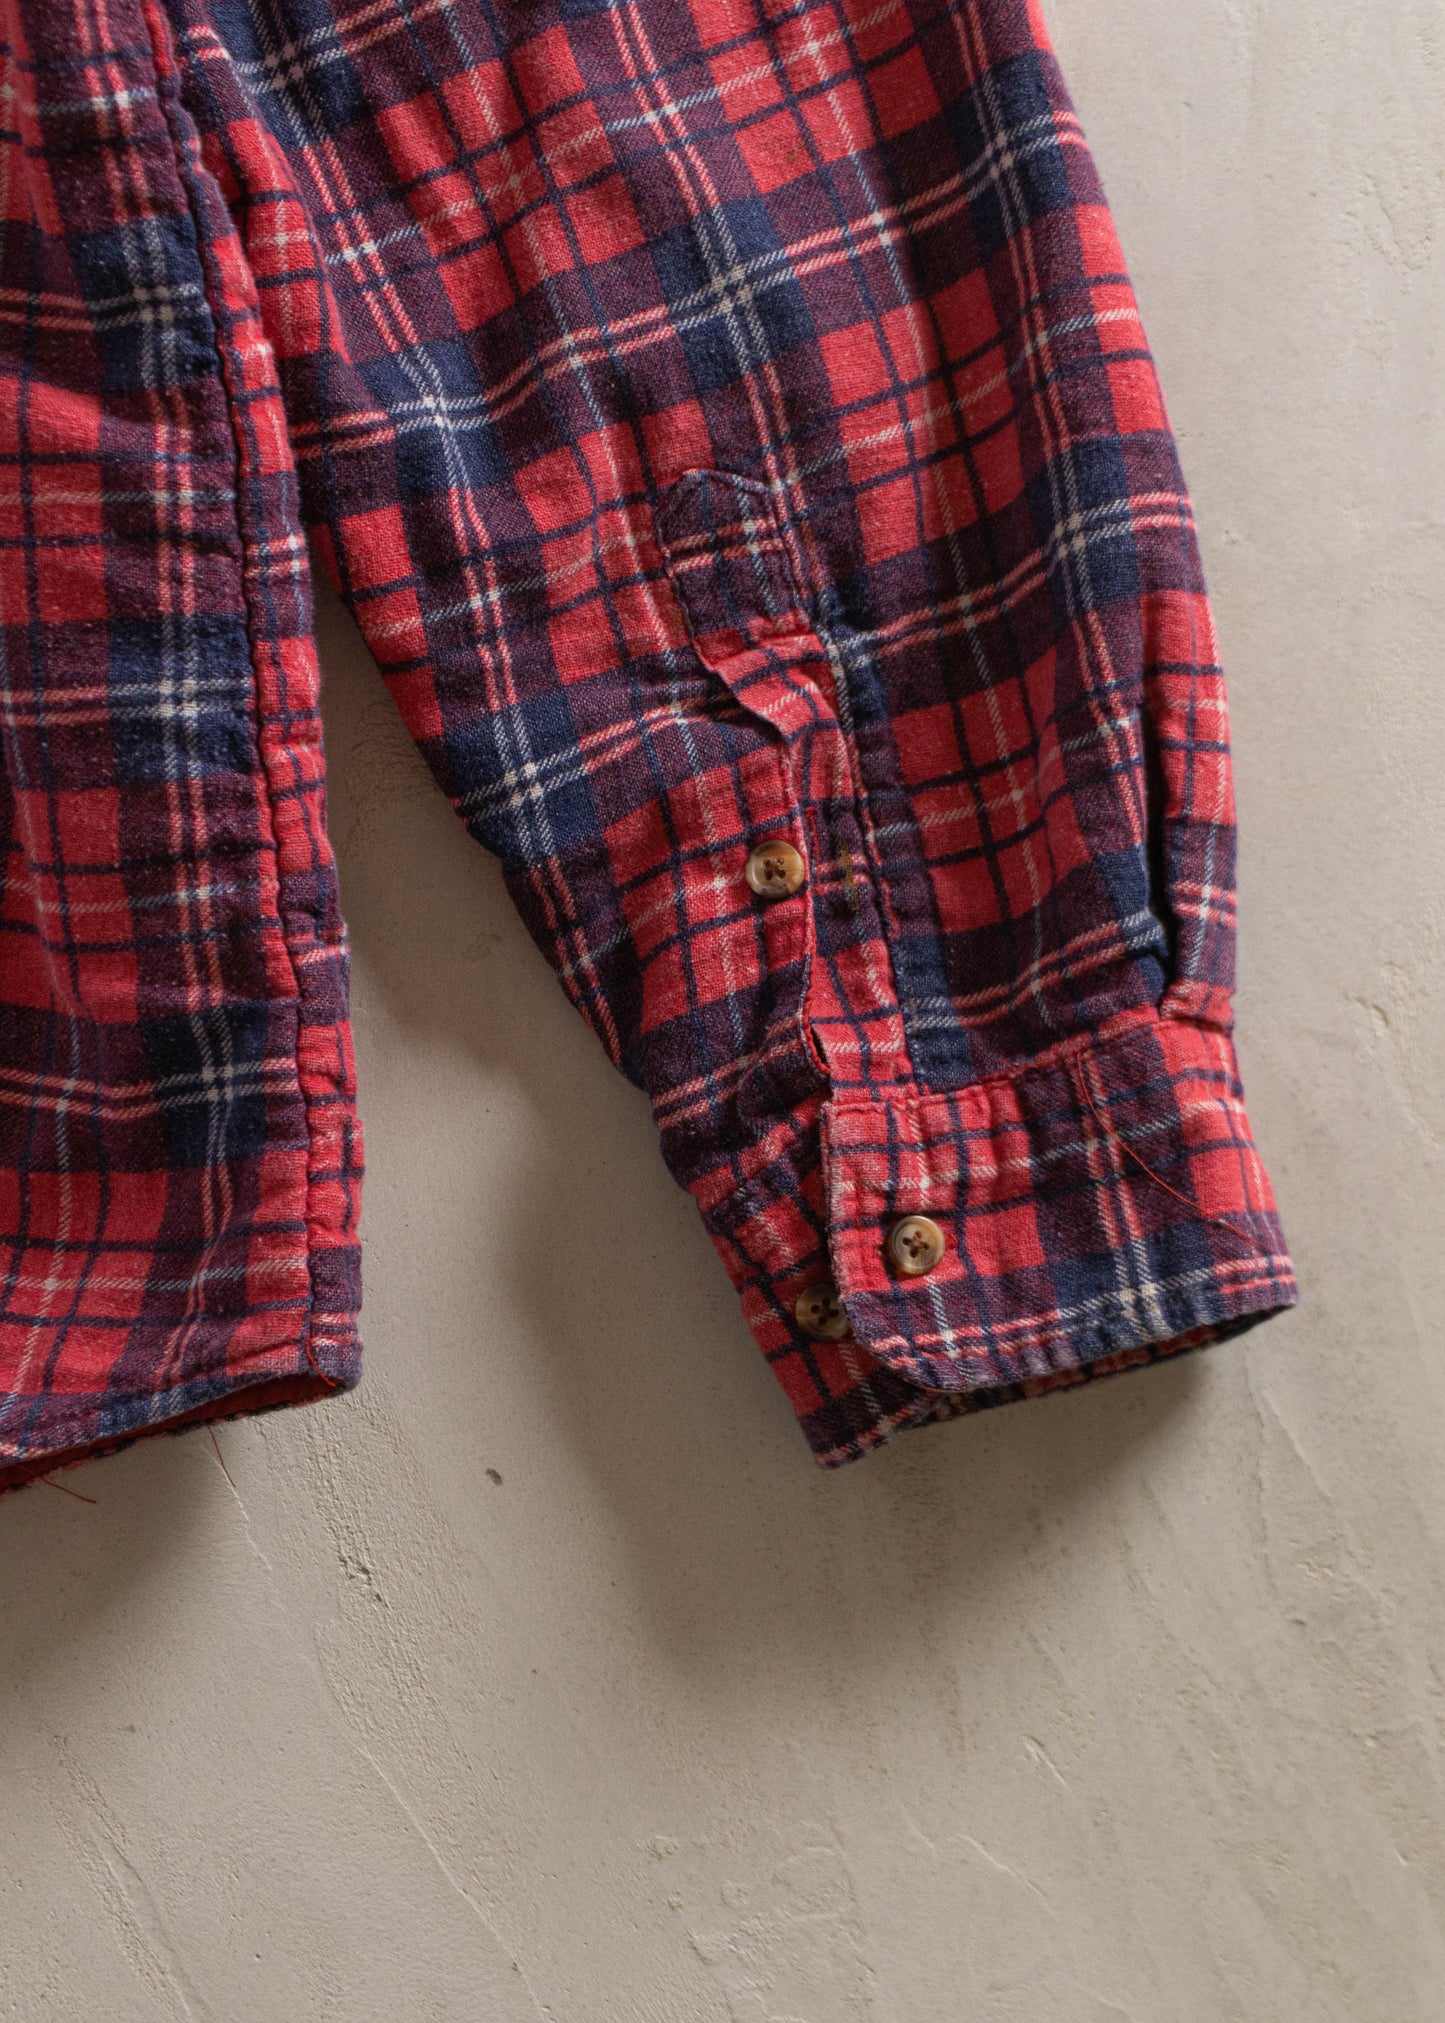 Vintage 1990s Padded Cotton Flannel Jacket Size XL/2XL